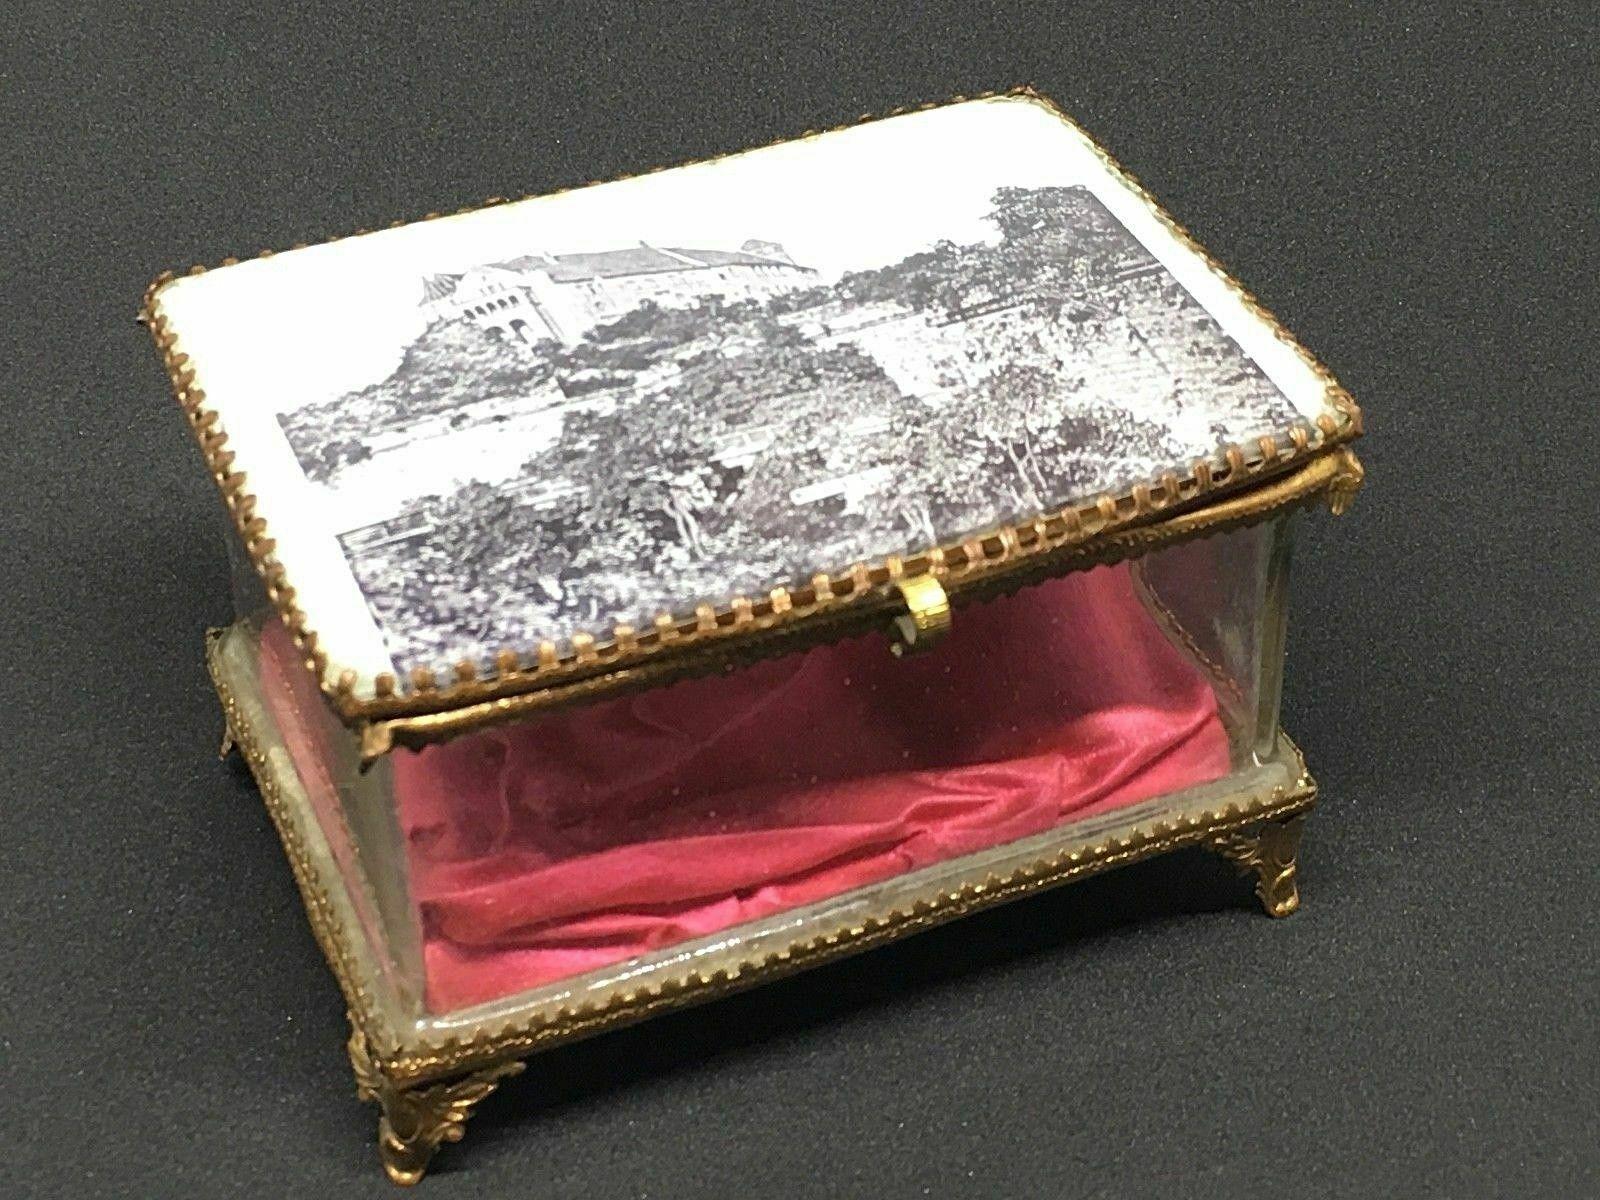 A gorgeous glass trinket box with some ormolu adornments. The hinged top featuring a City view of the Nuremberg Castle. No restoration has been carried out on this charming little trinket box, which remains in very stabile and functioning condition,